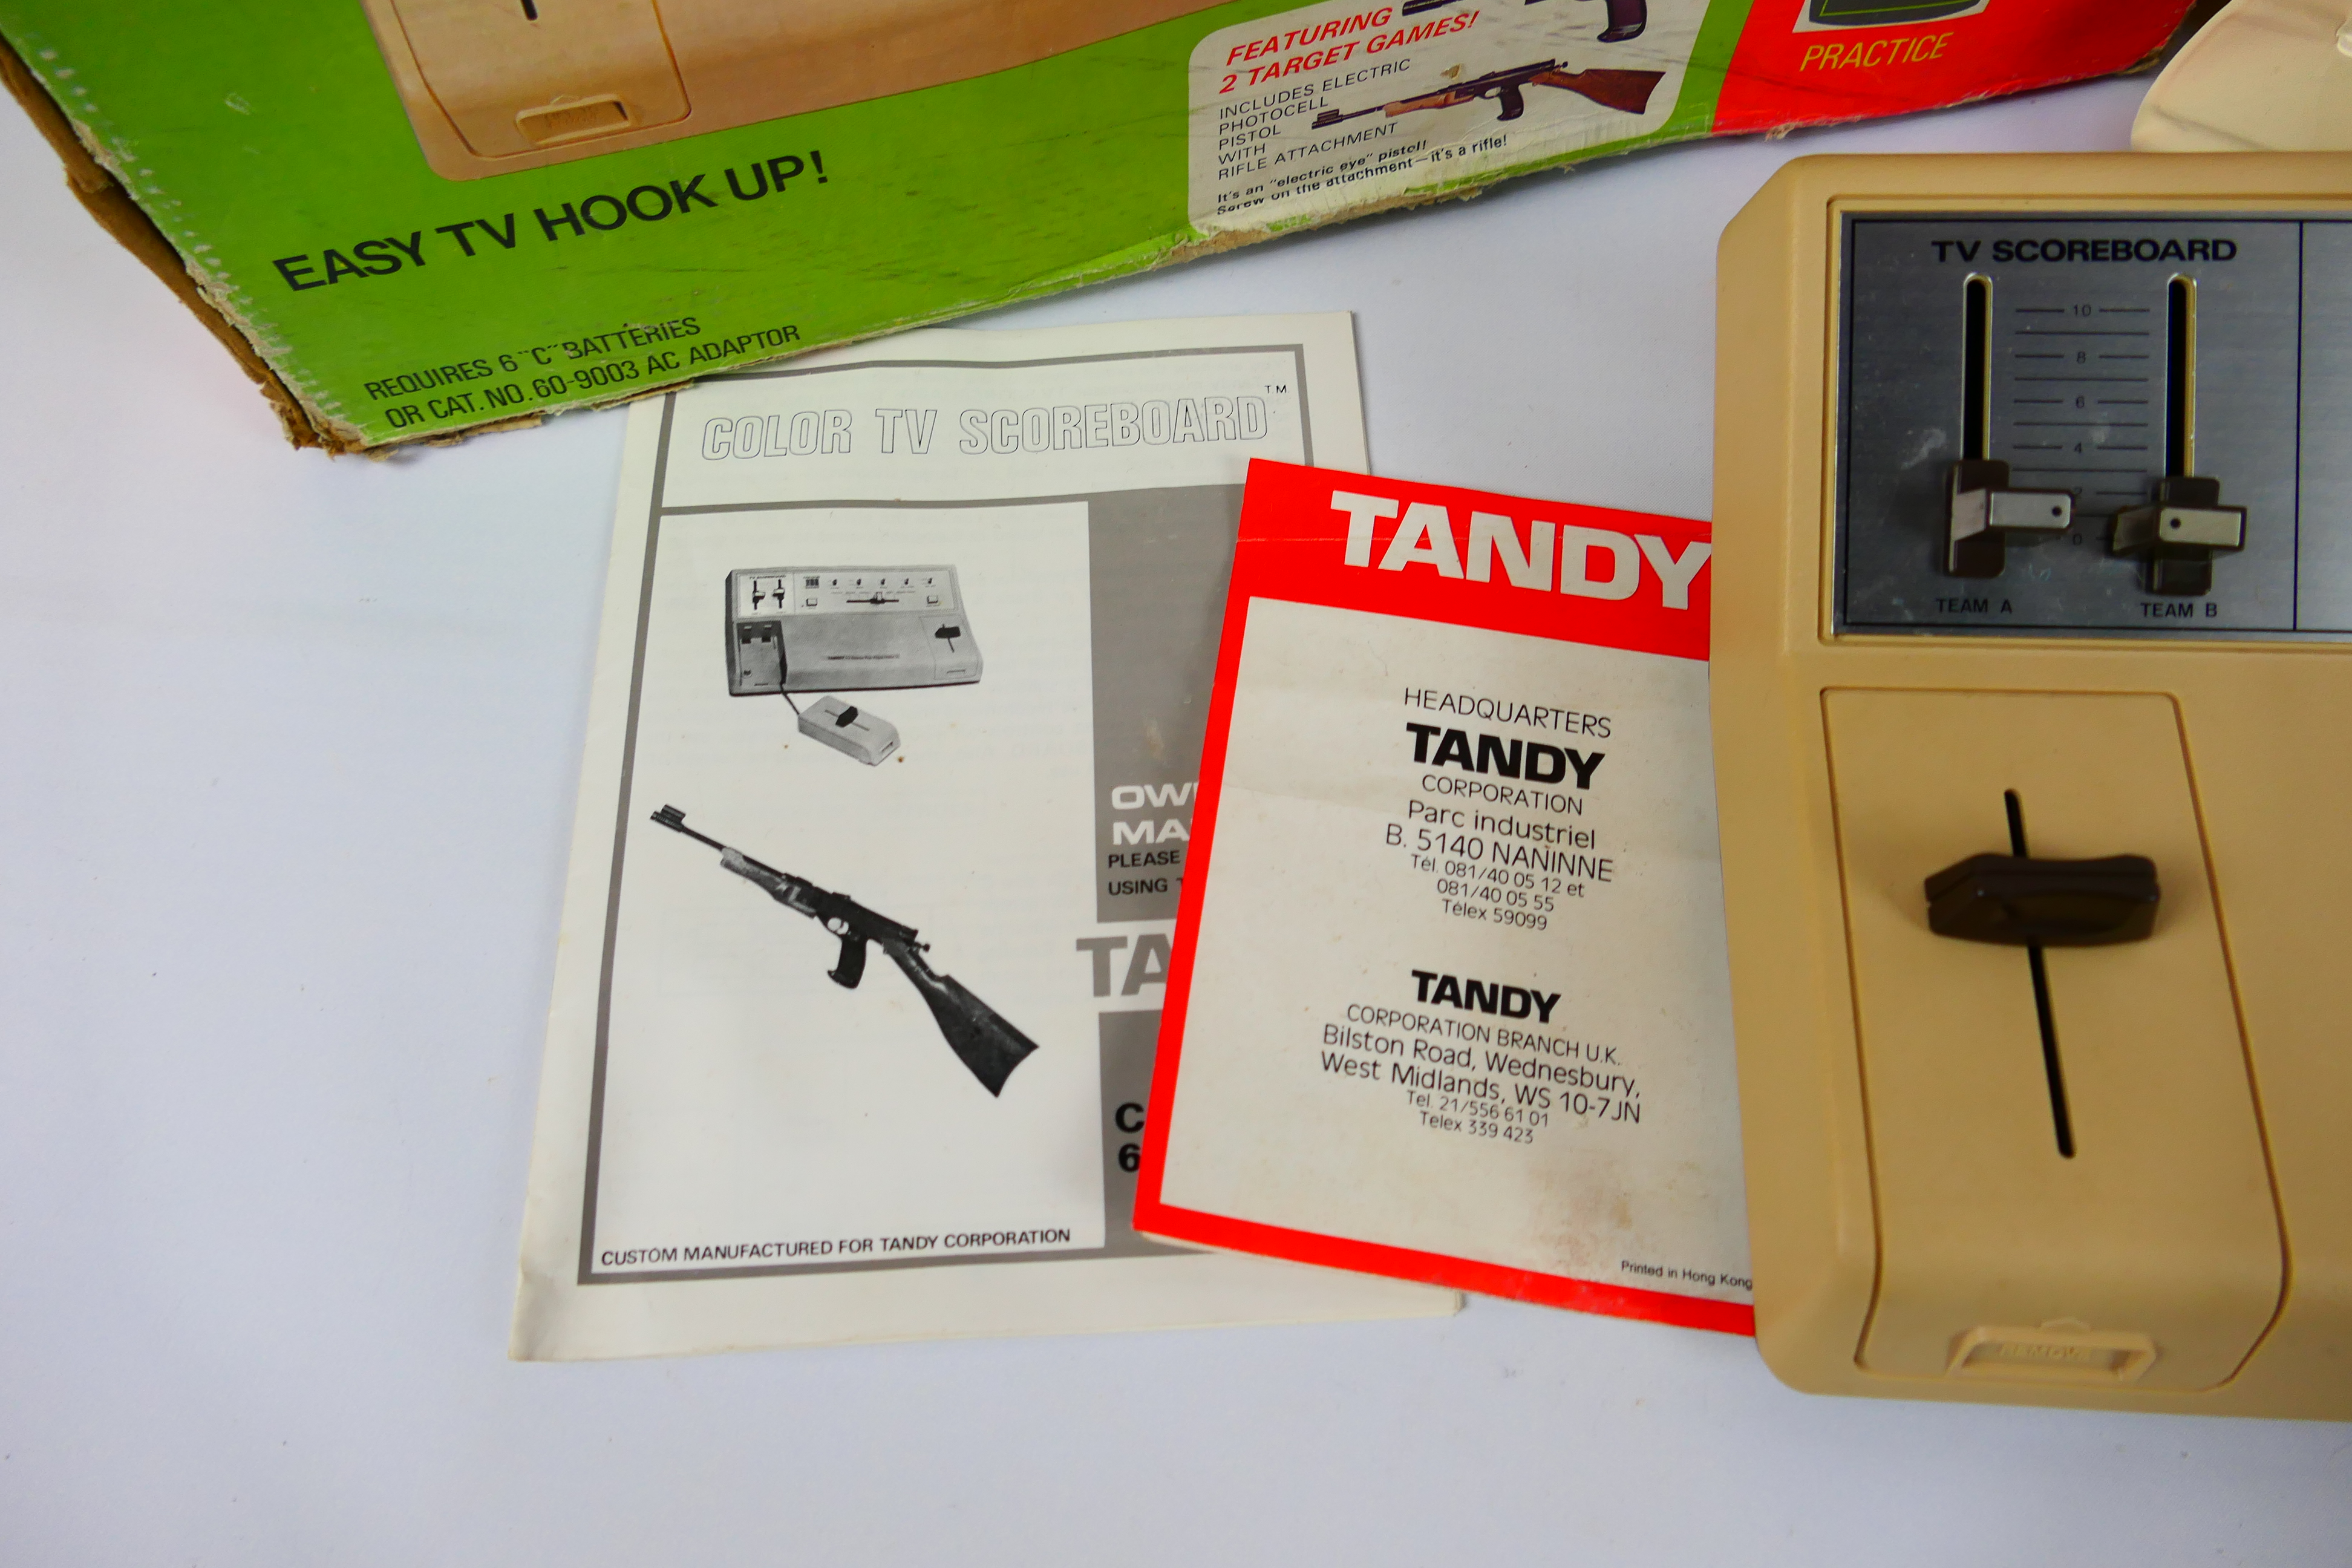 Tandy - A vintage Electronic Full Colour Pistol/Rifle game - Comes with pistol and rifle attachment. - Bild 5 aus 5